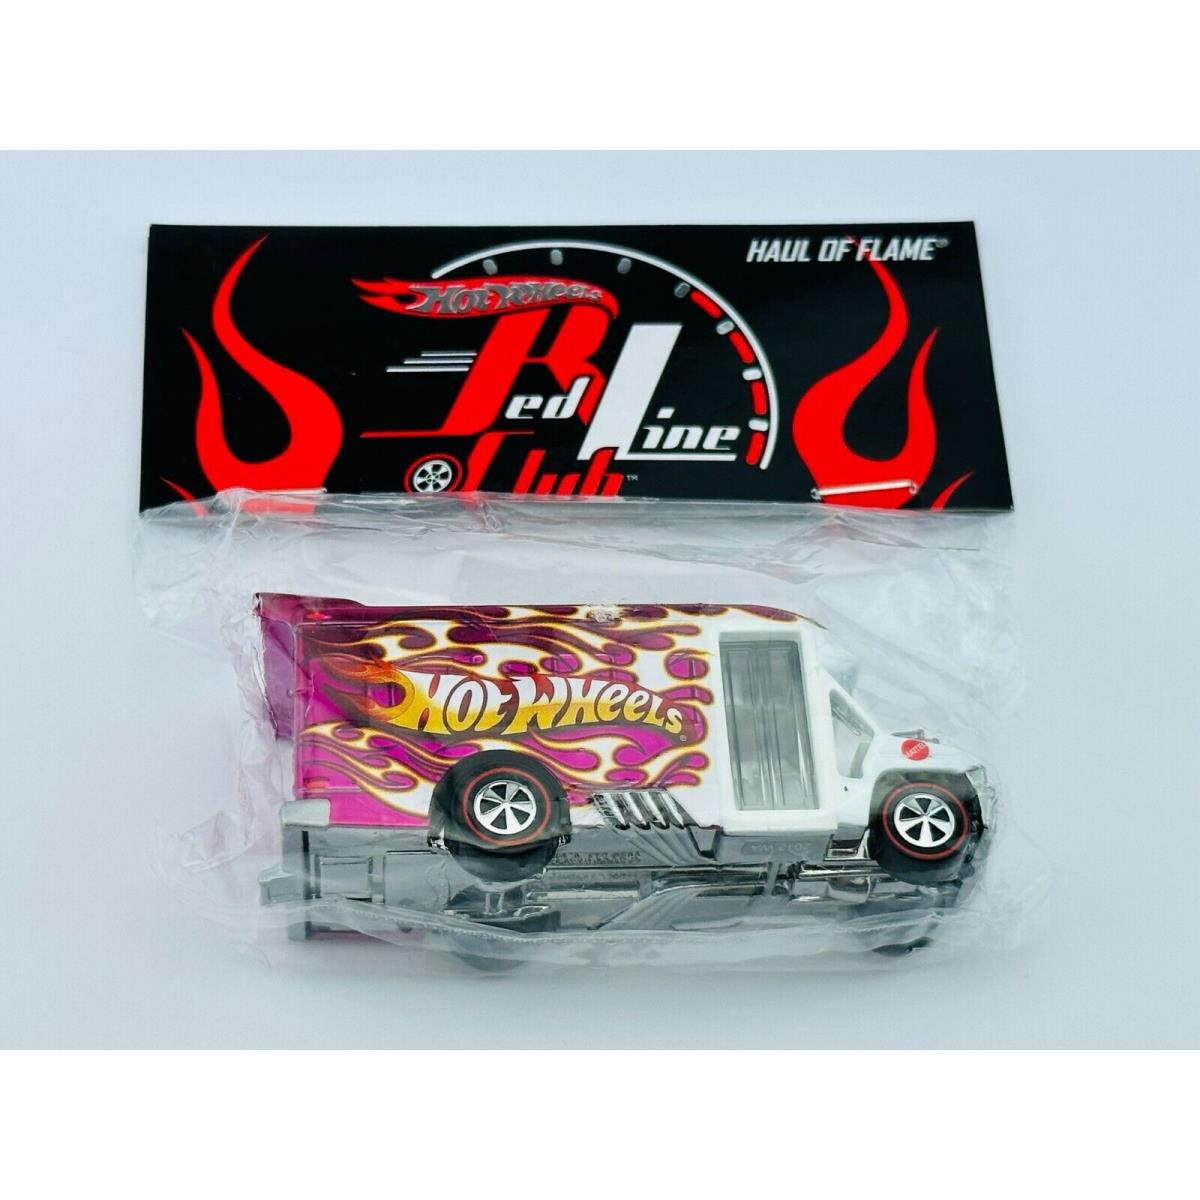 Hot Wheels Rlc 2012 Convention Haul OF Flame Pink Party Car in Baggie